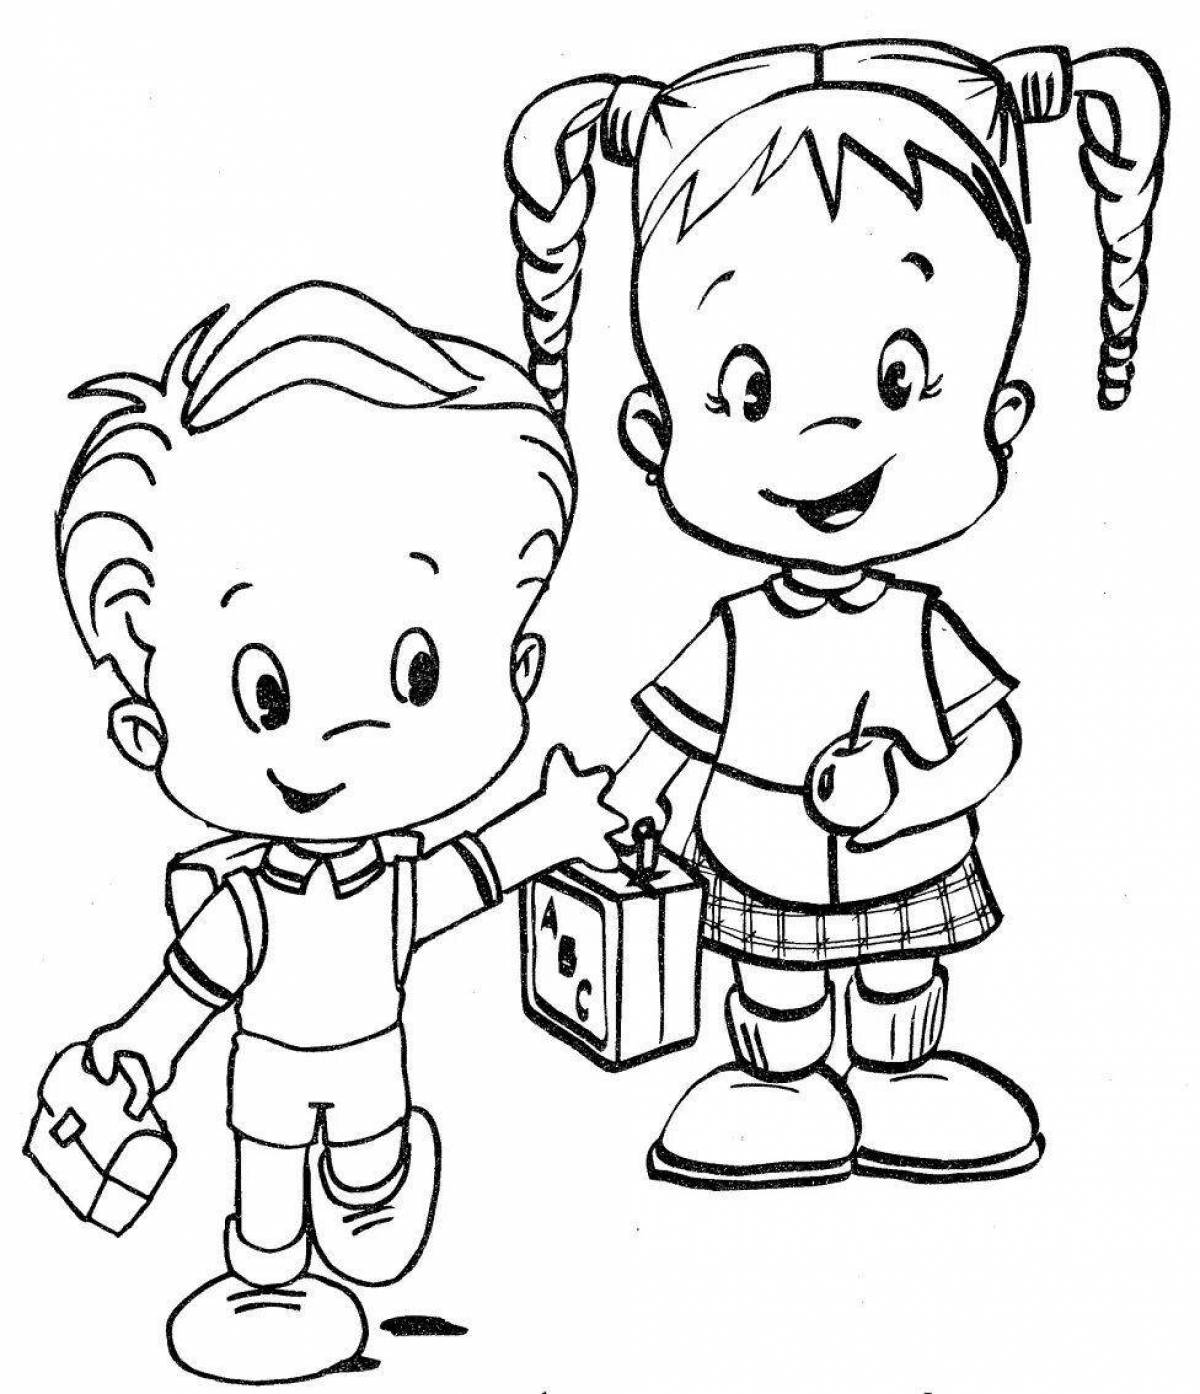 Cute friendship coloring page